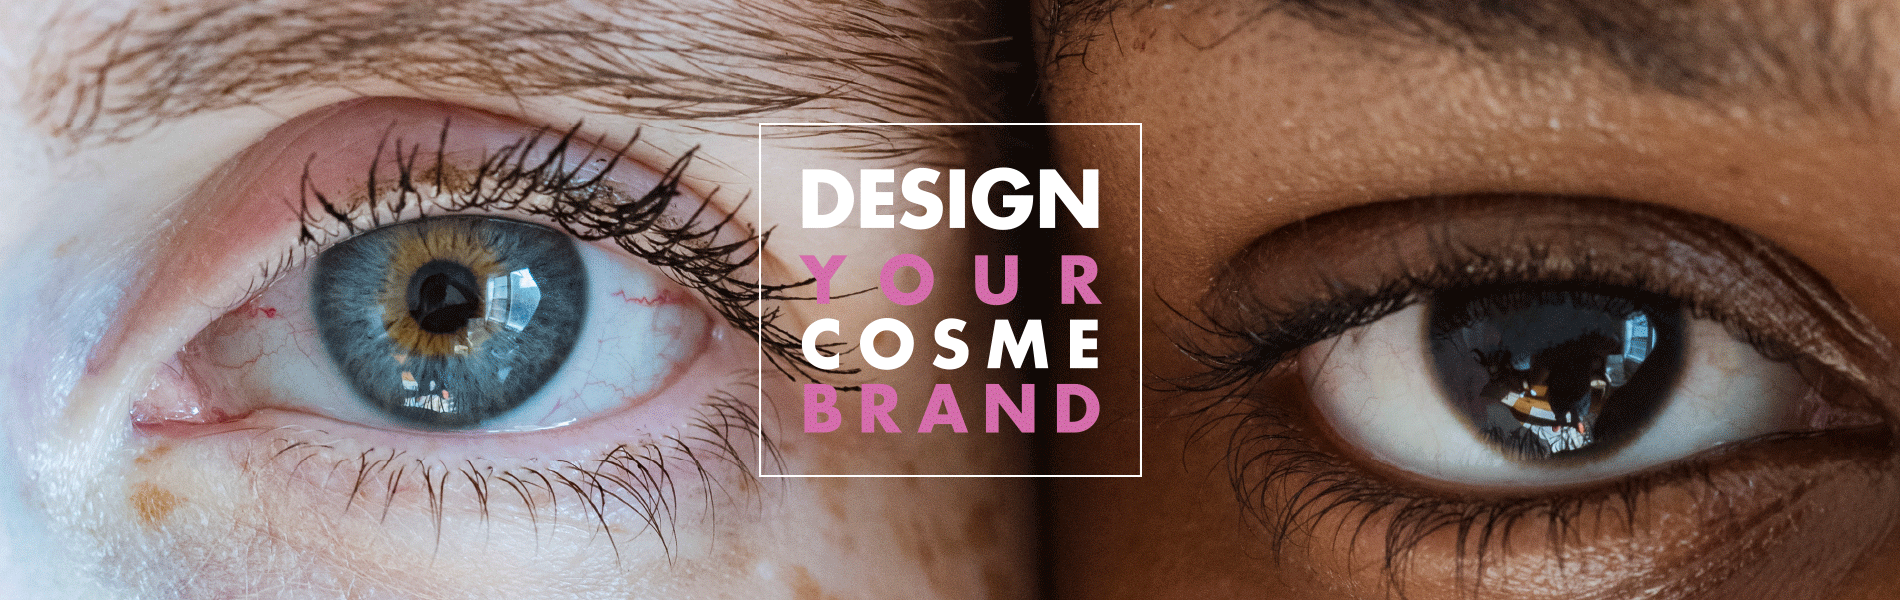 DESIGN YOUR COSME BRAND